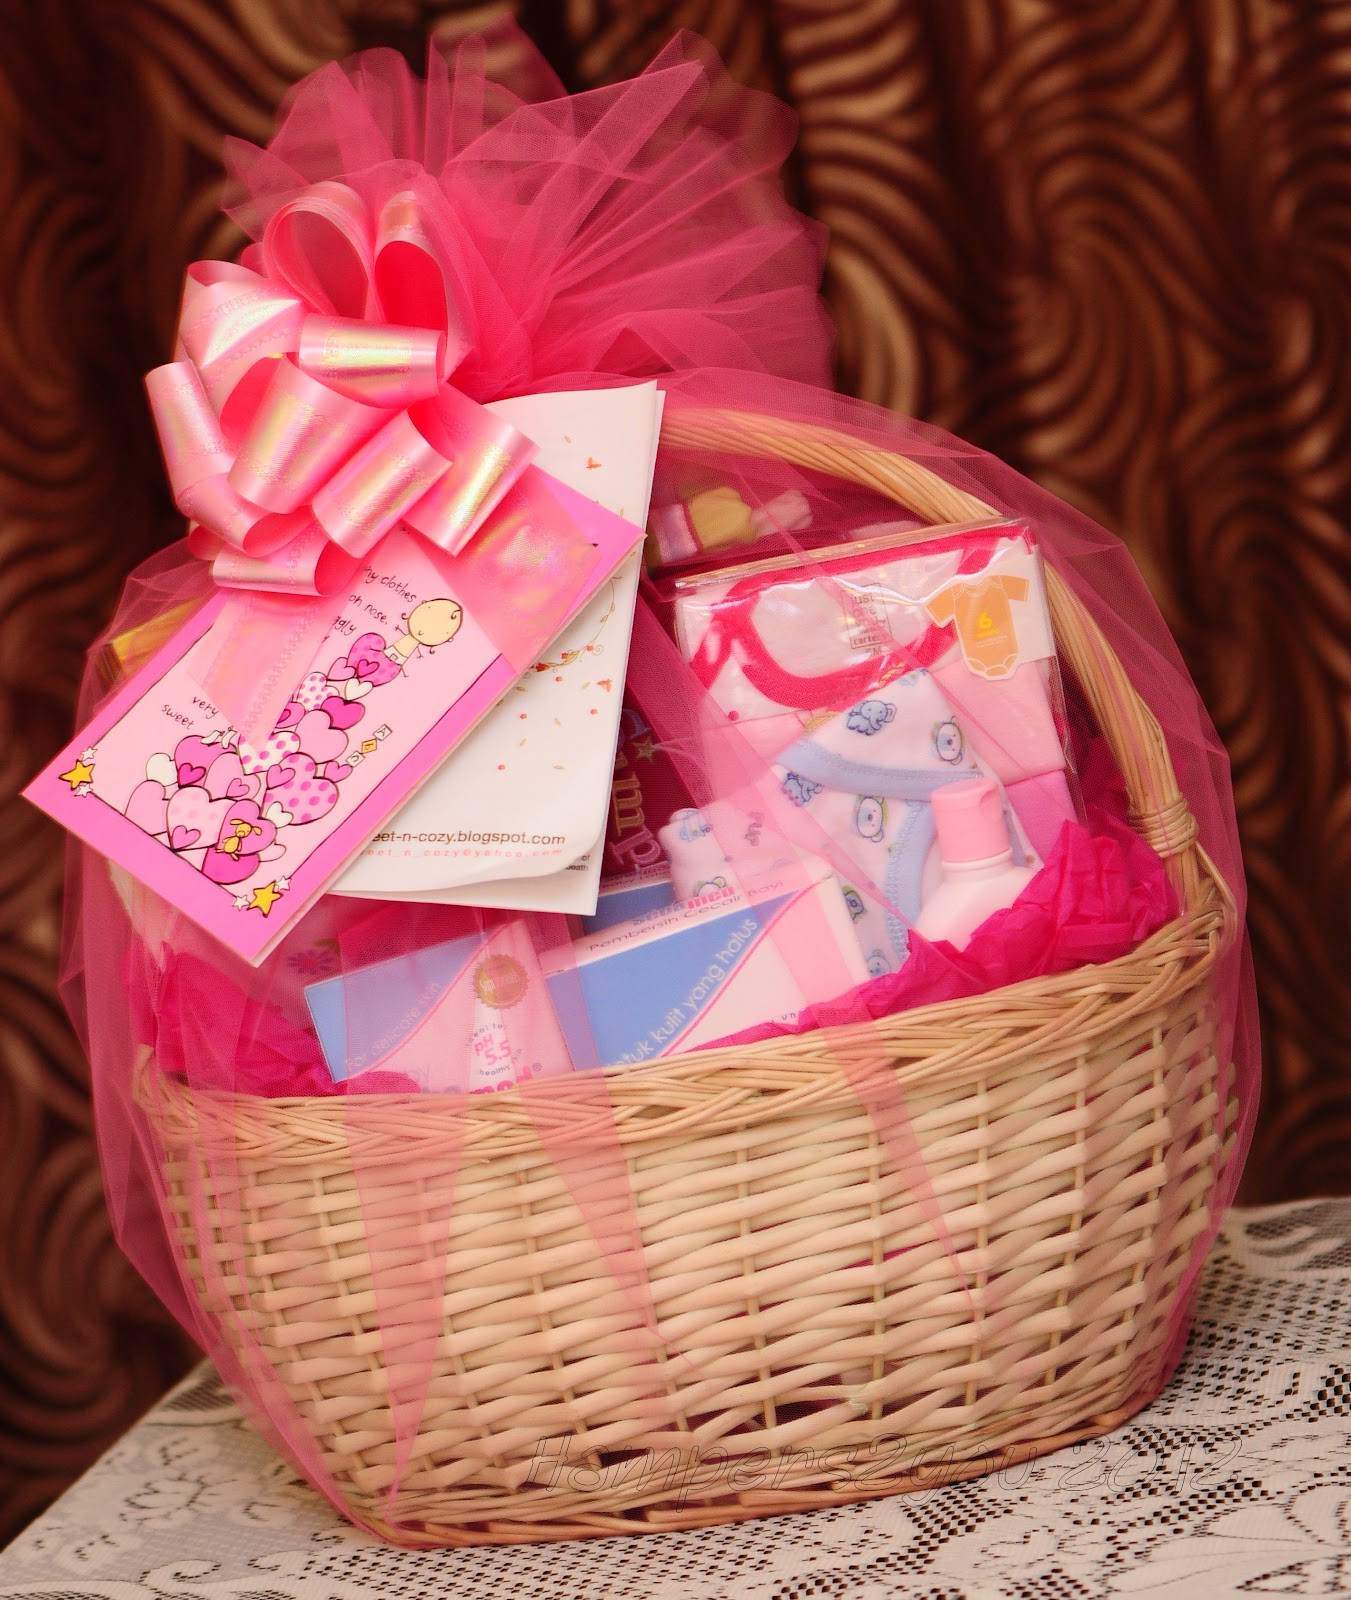 Born Baby Gift Ideas
 Hampers2you Baby Gift Baskets for Newborn Girl